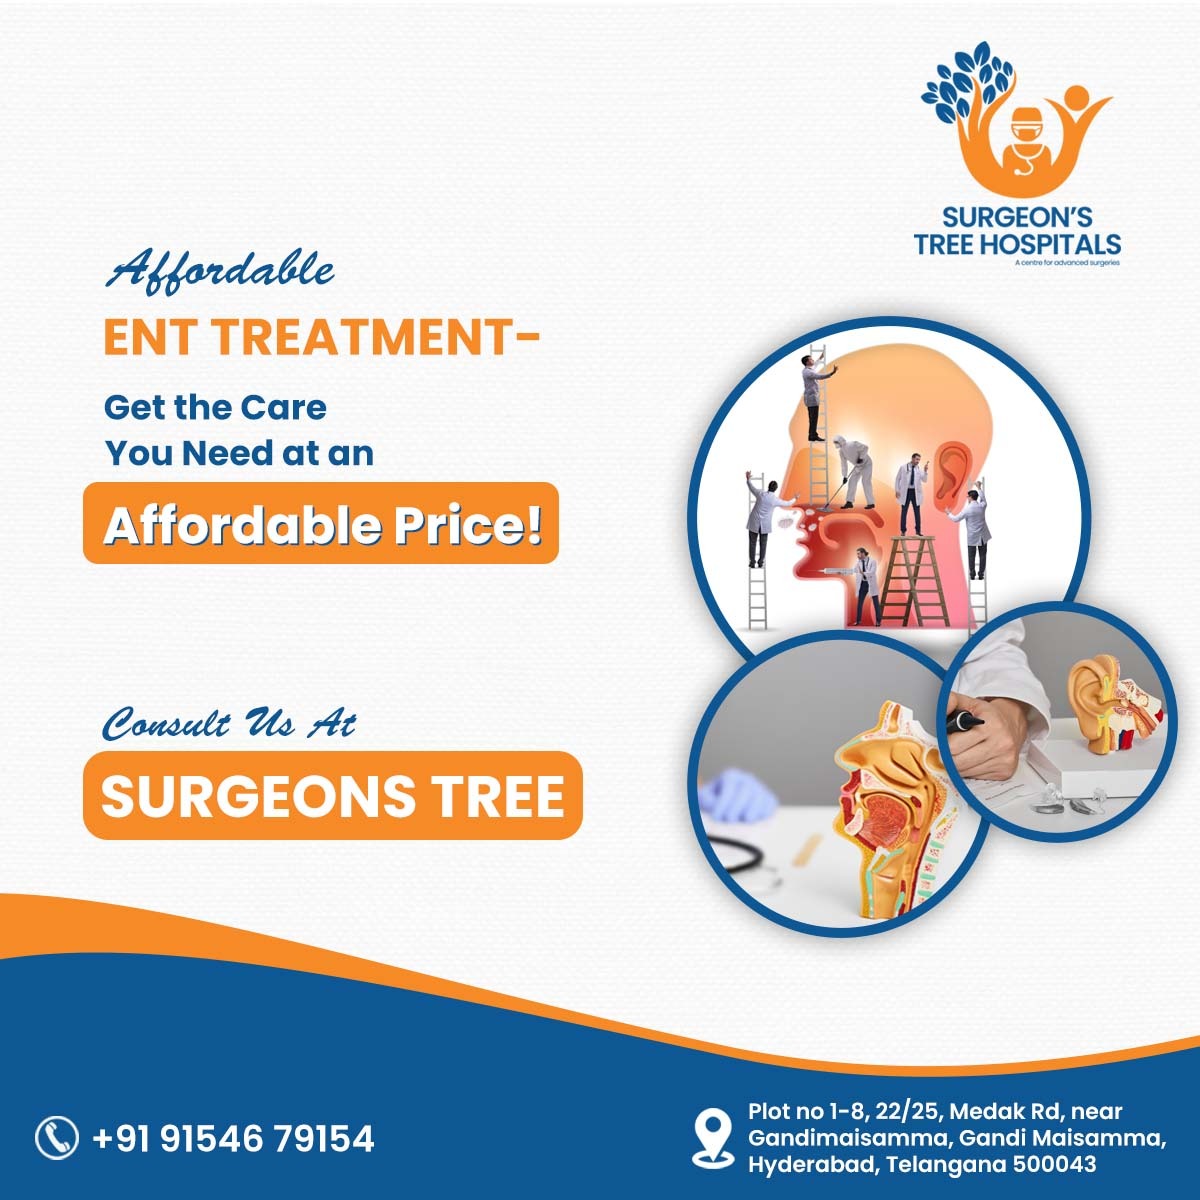 Cost-effective treatment for all ENT needs. Choose us for the best medical services.
.
#surgeon #varicocele #medical #appendectomy #cholecystectomy #laparoscopiccholecystectomy #fistula #lasersurgery #laproscopicsurgery #Hysterectomy #hernia #Piles #surgicalservices #emergency